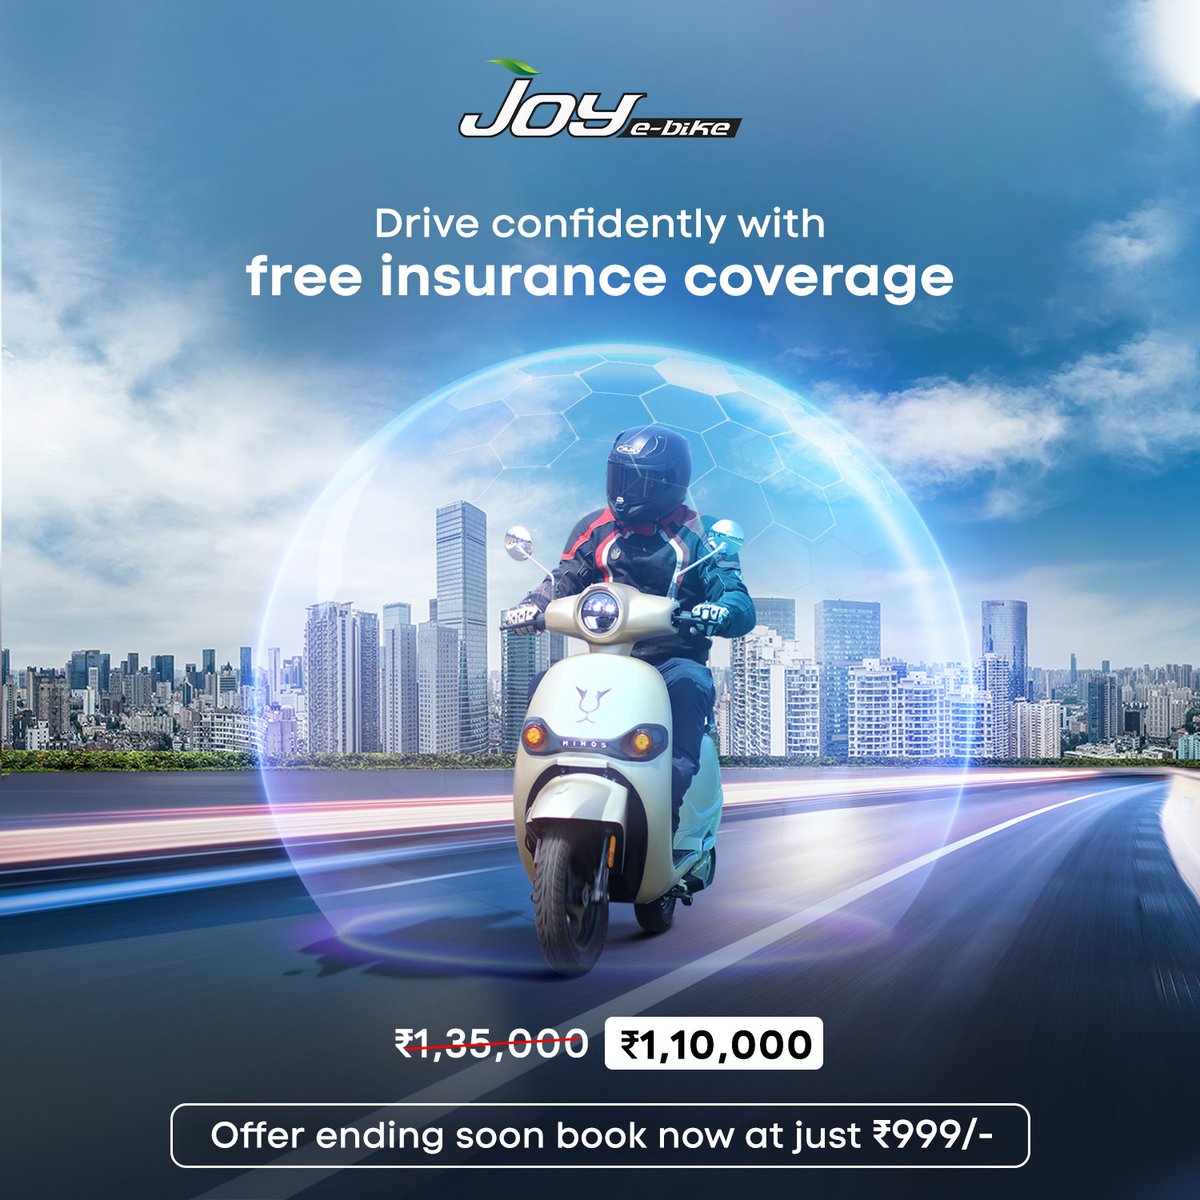 Ride easy, ride insured! Joy e-bikes come with free insurance, so you can focus on the journey ahead. Hurry and book your joy e-bike at just 999/- before the offer ends. #Joyebike #FreeInsurance #LongLifeBattery #Mihos #StrongBody #LongRange #discountoffer